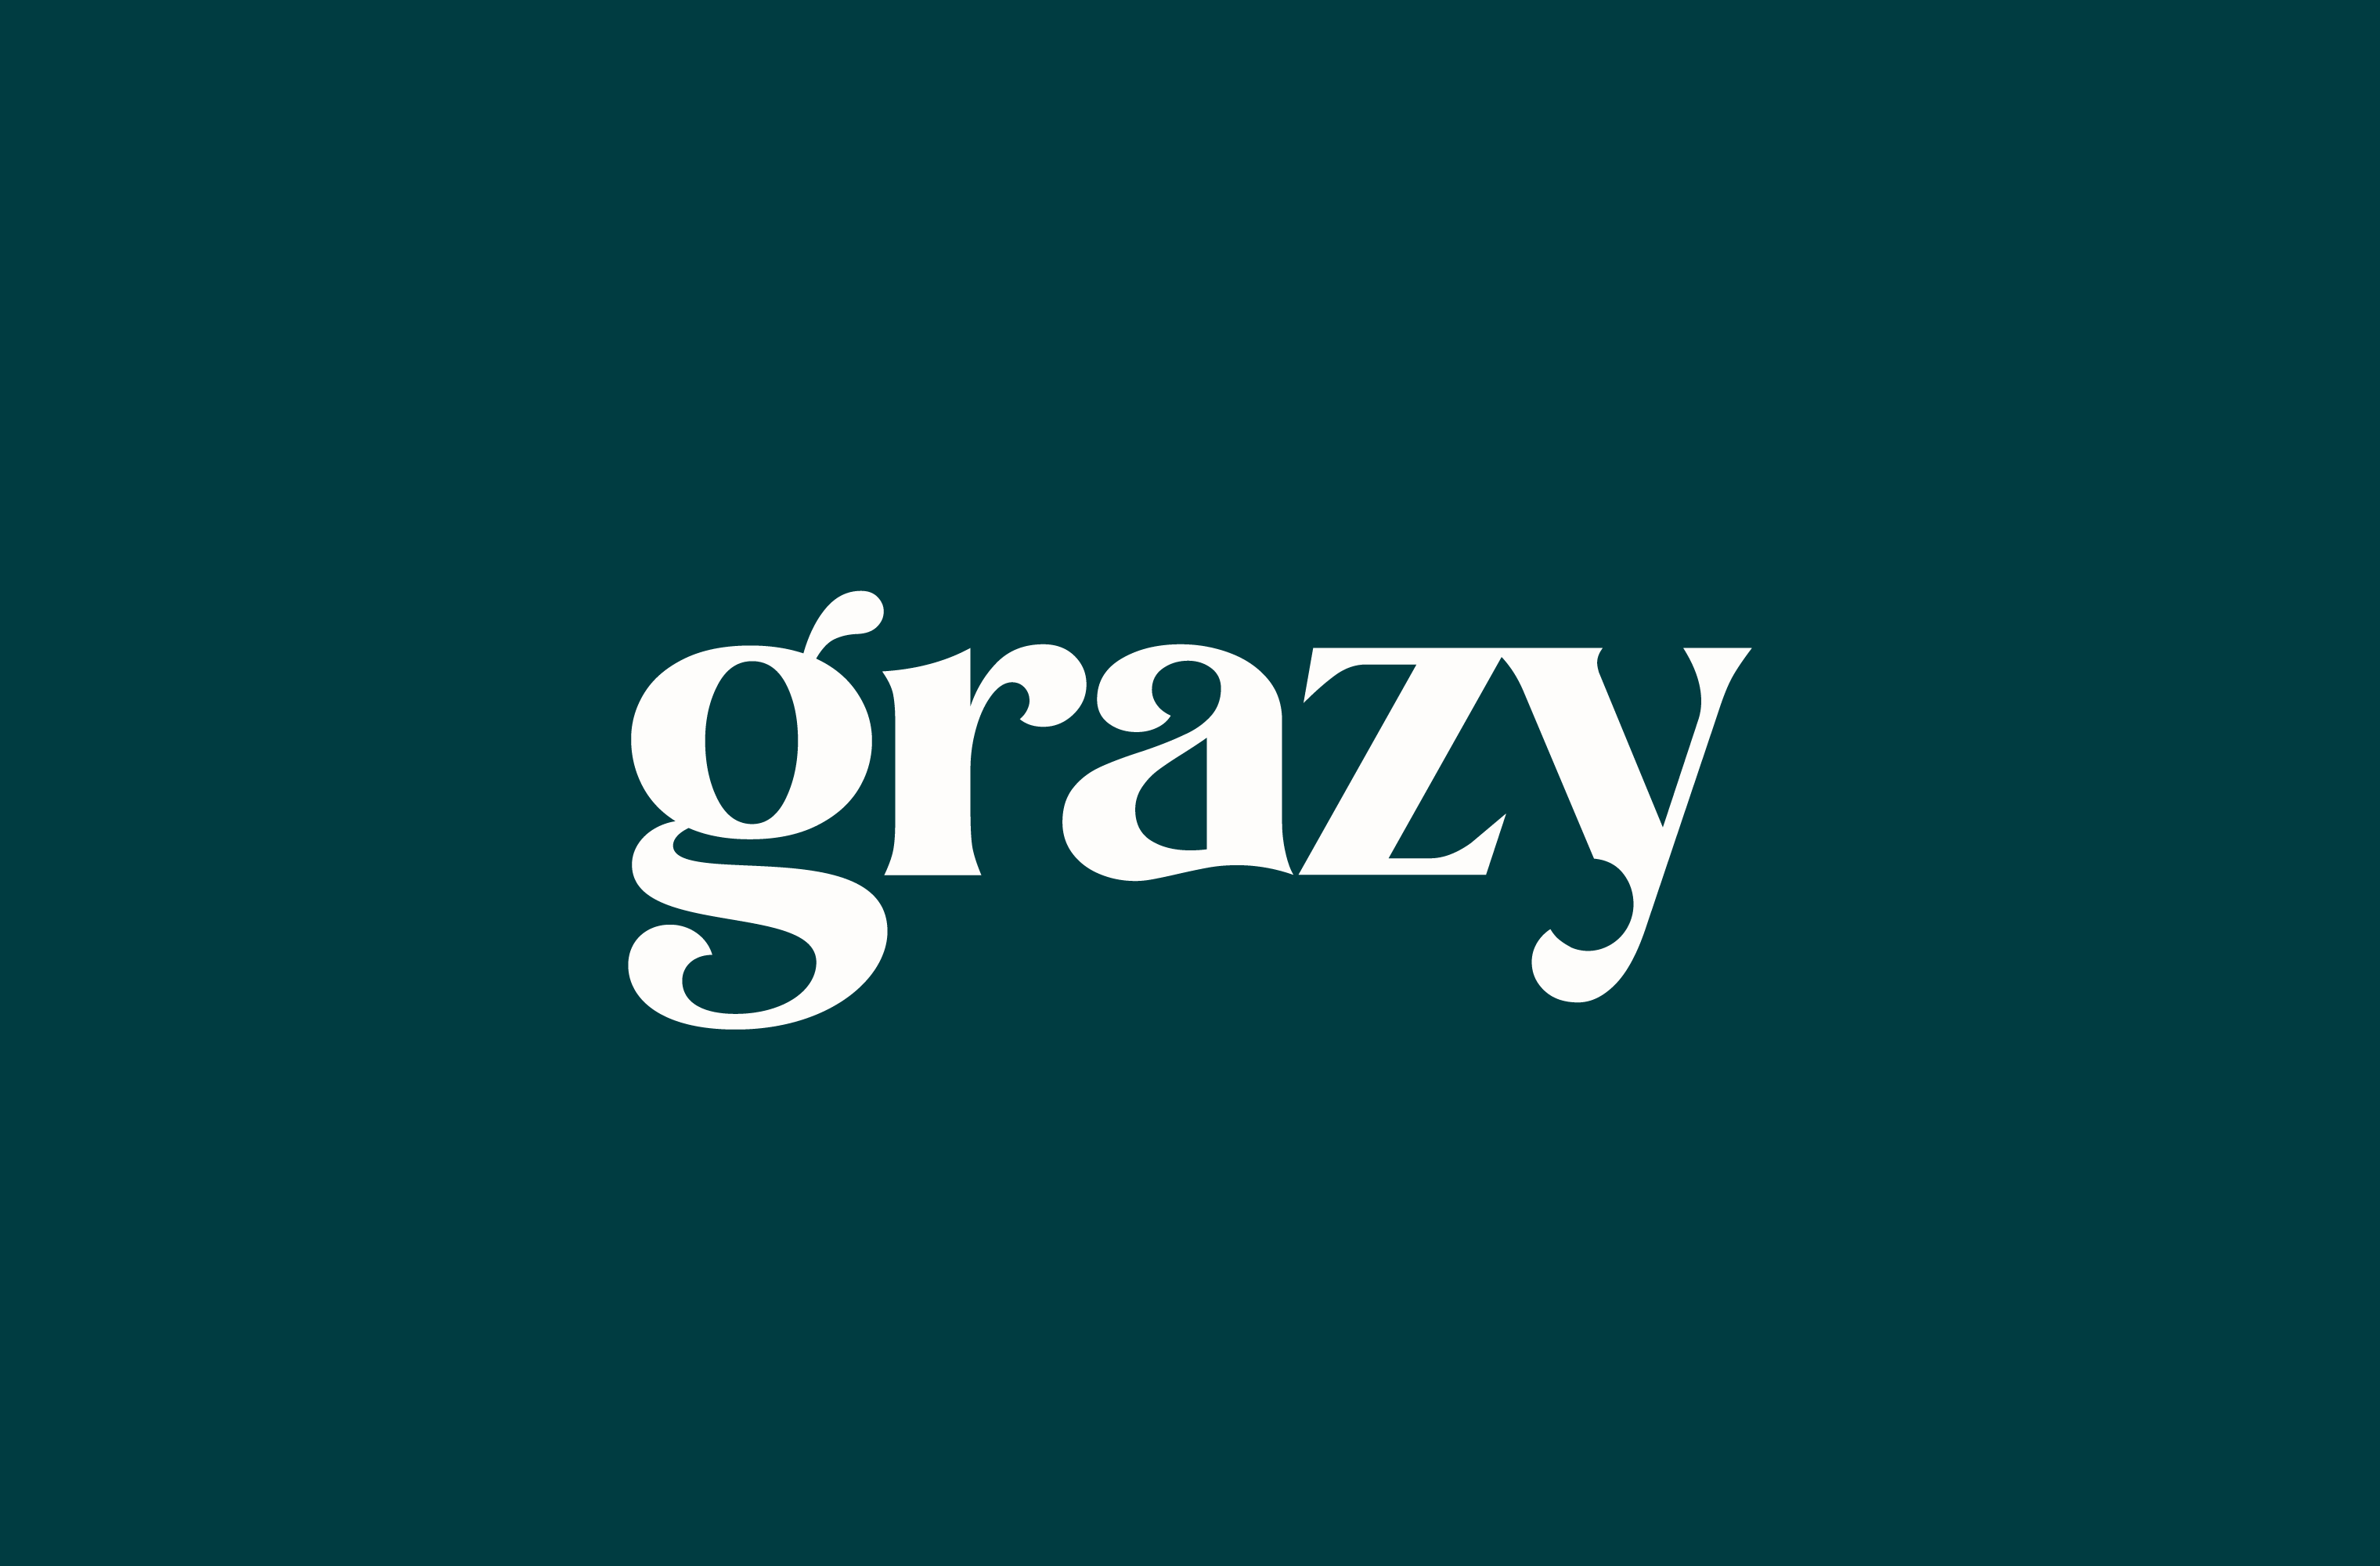 White Grazy wordmark on a teal background